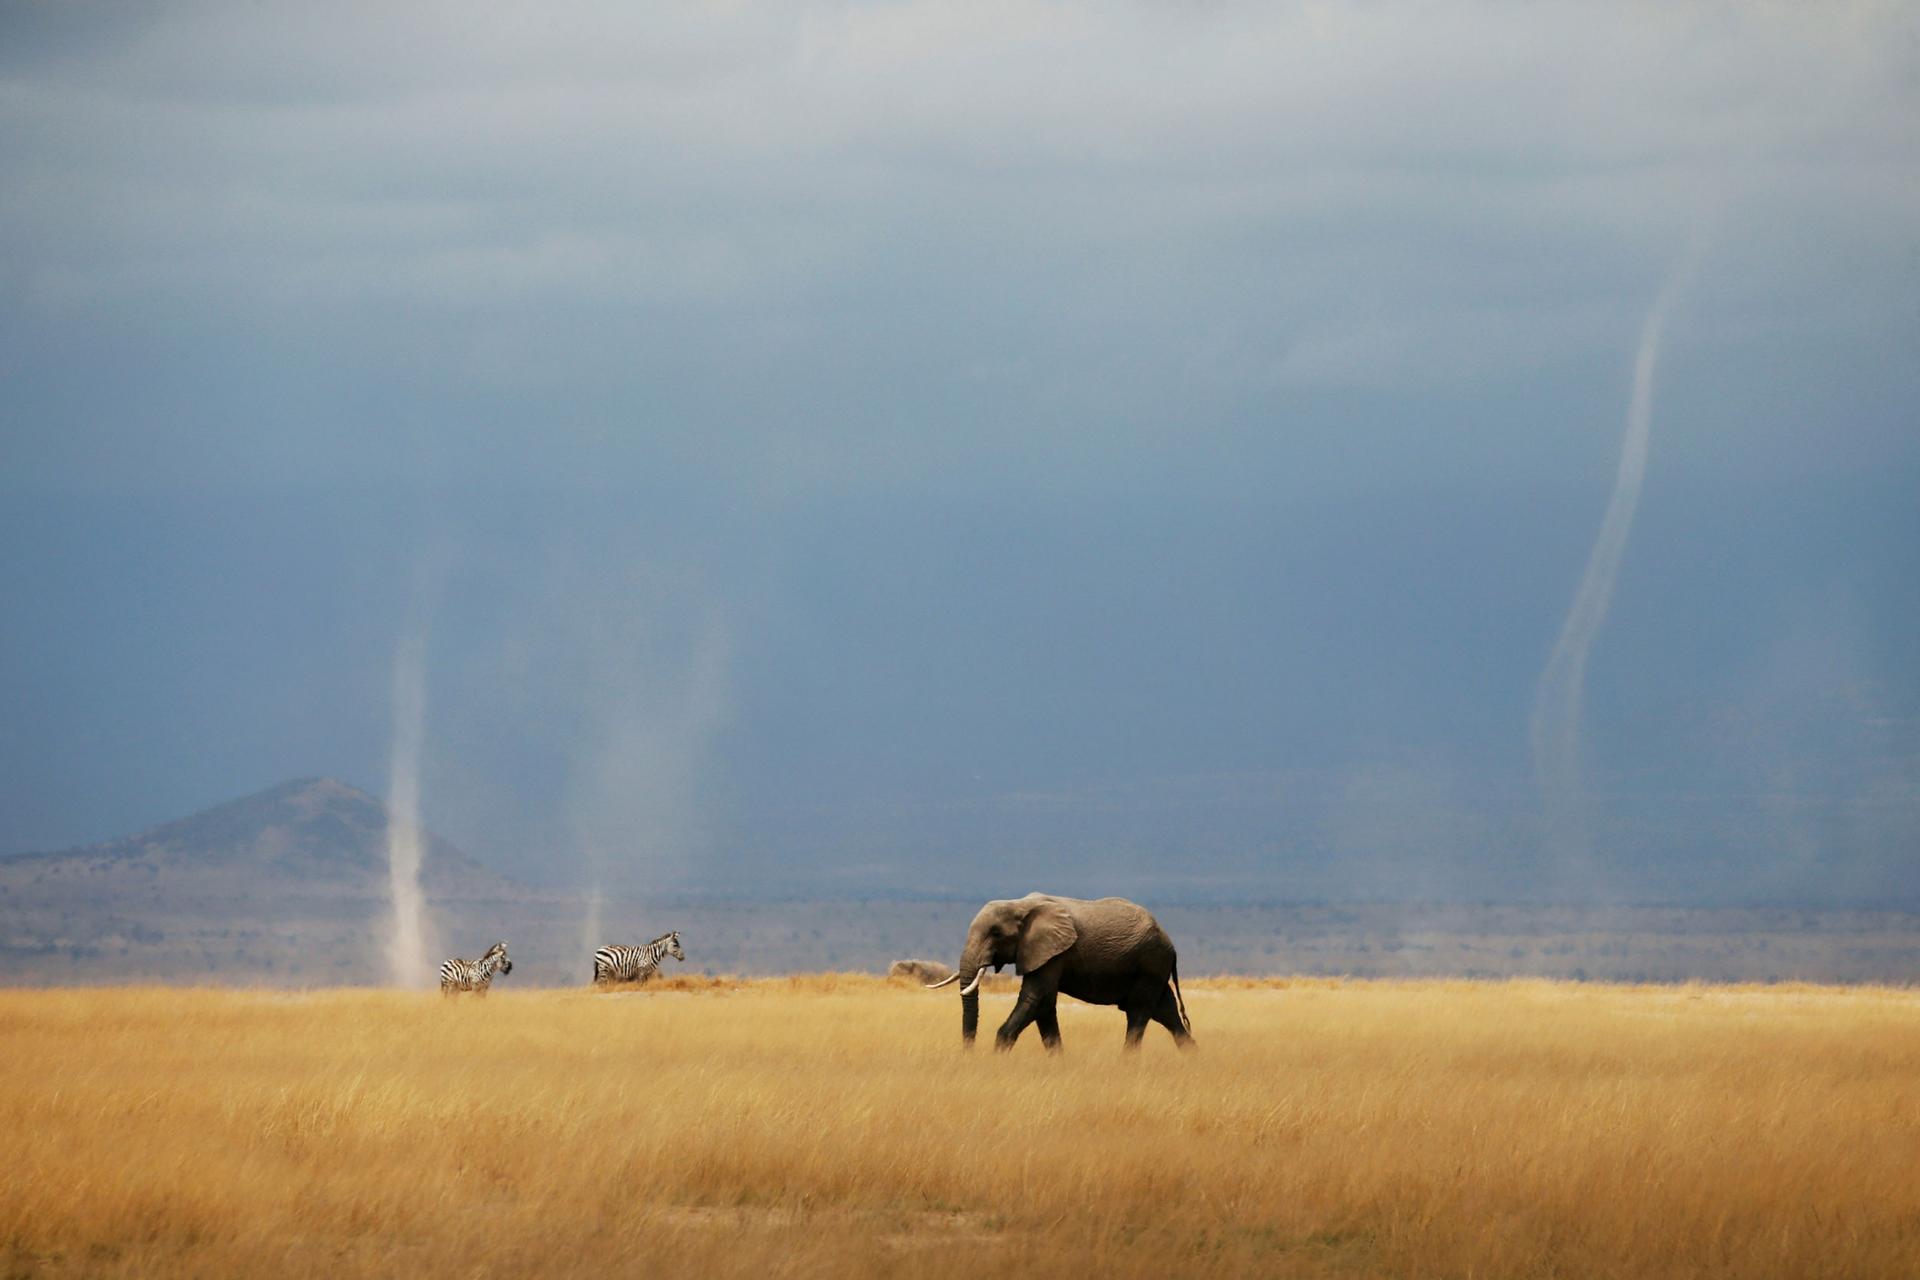 A whirlwind is seen as elephant and zebras walk through the Amboseli National Park, Kenya.